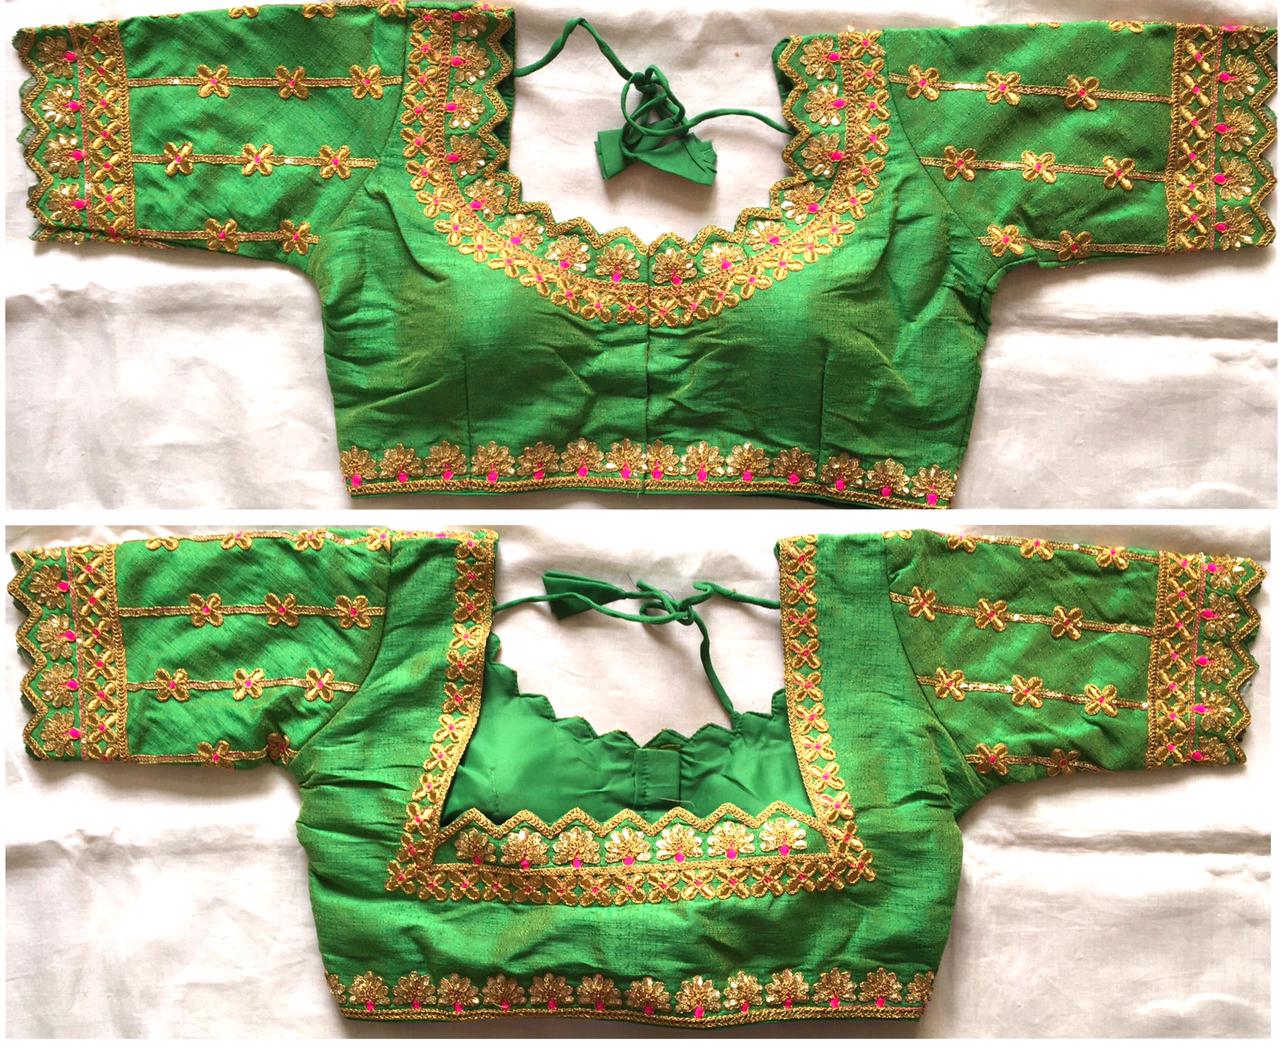 blouse pattern there is cutwork